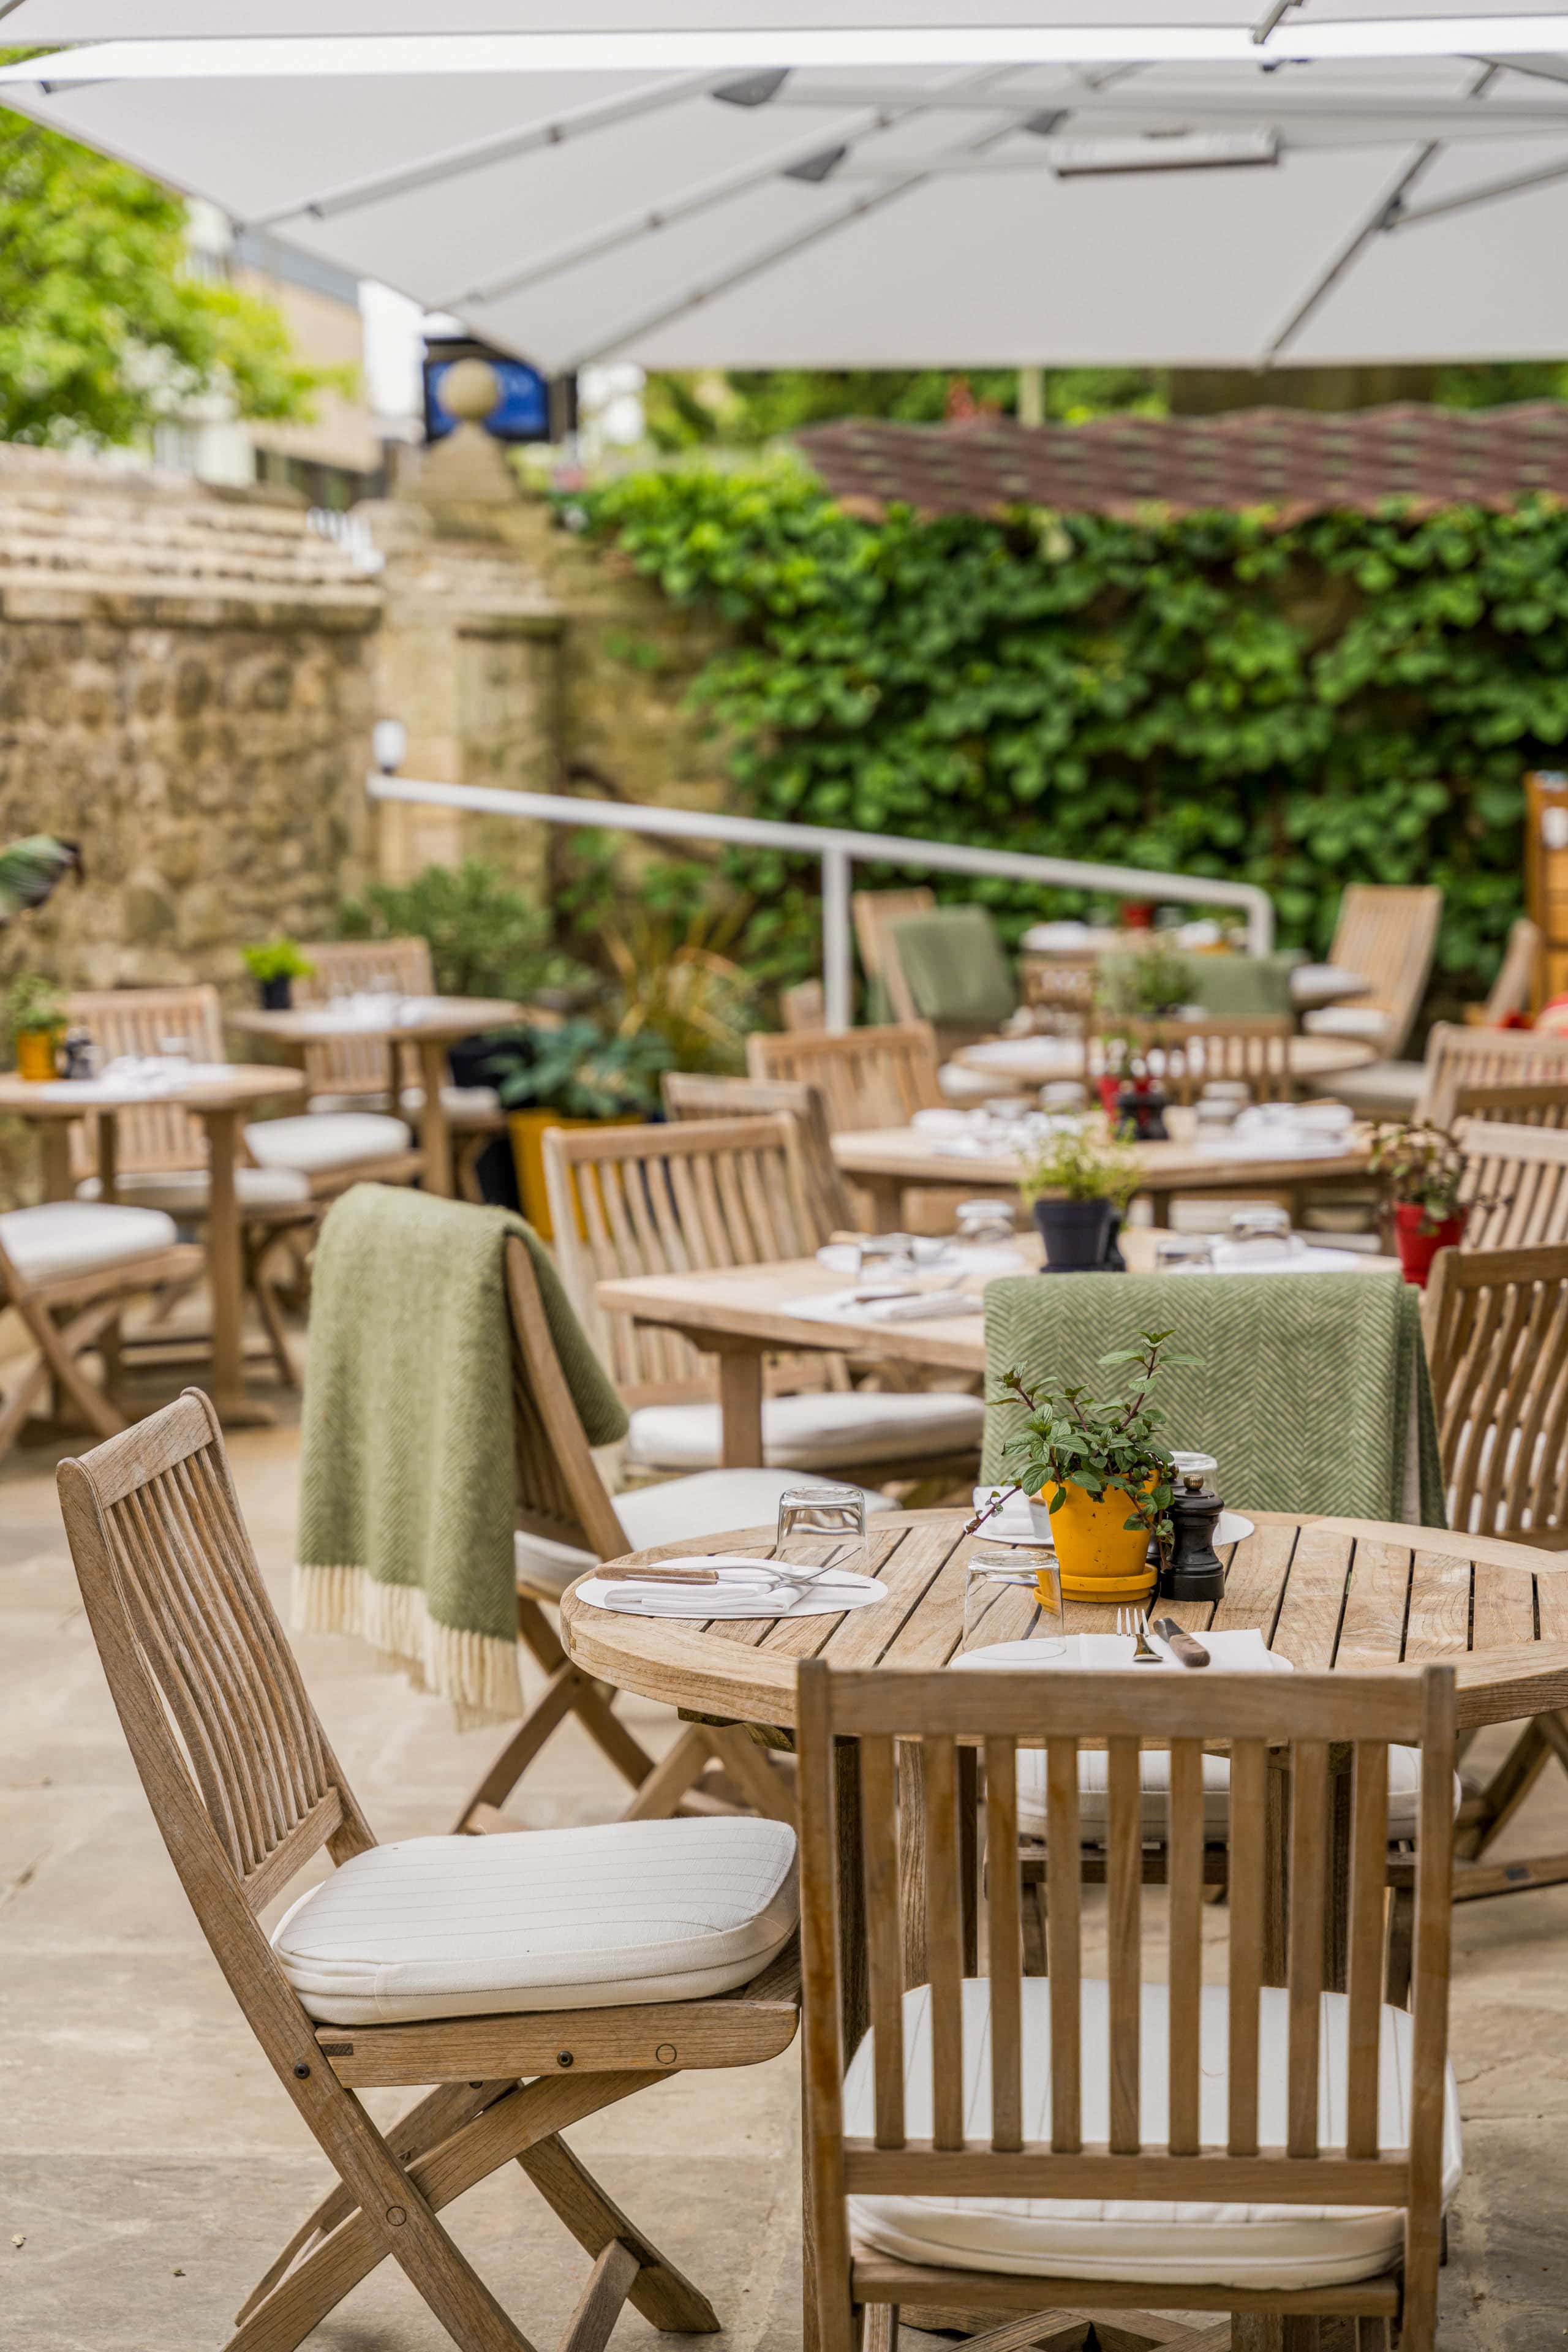 A7R03844 - 2024 - Parsonage Grill - Oxford - High Res - Outdoor Terrace Seating - Web Hero